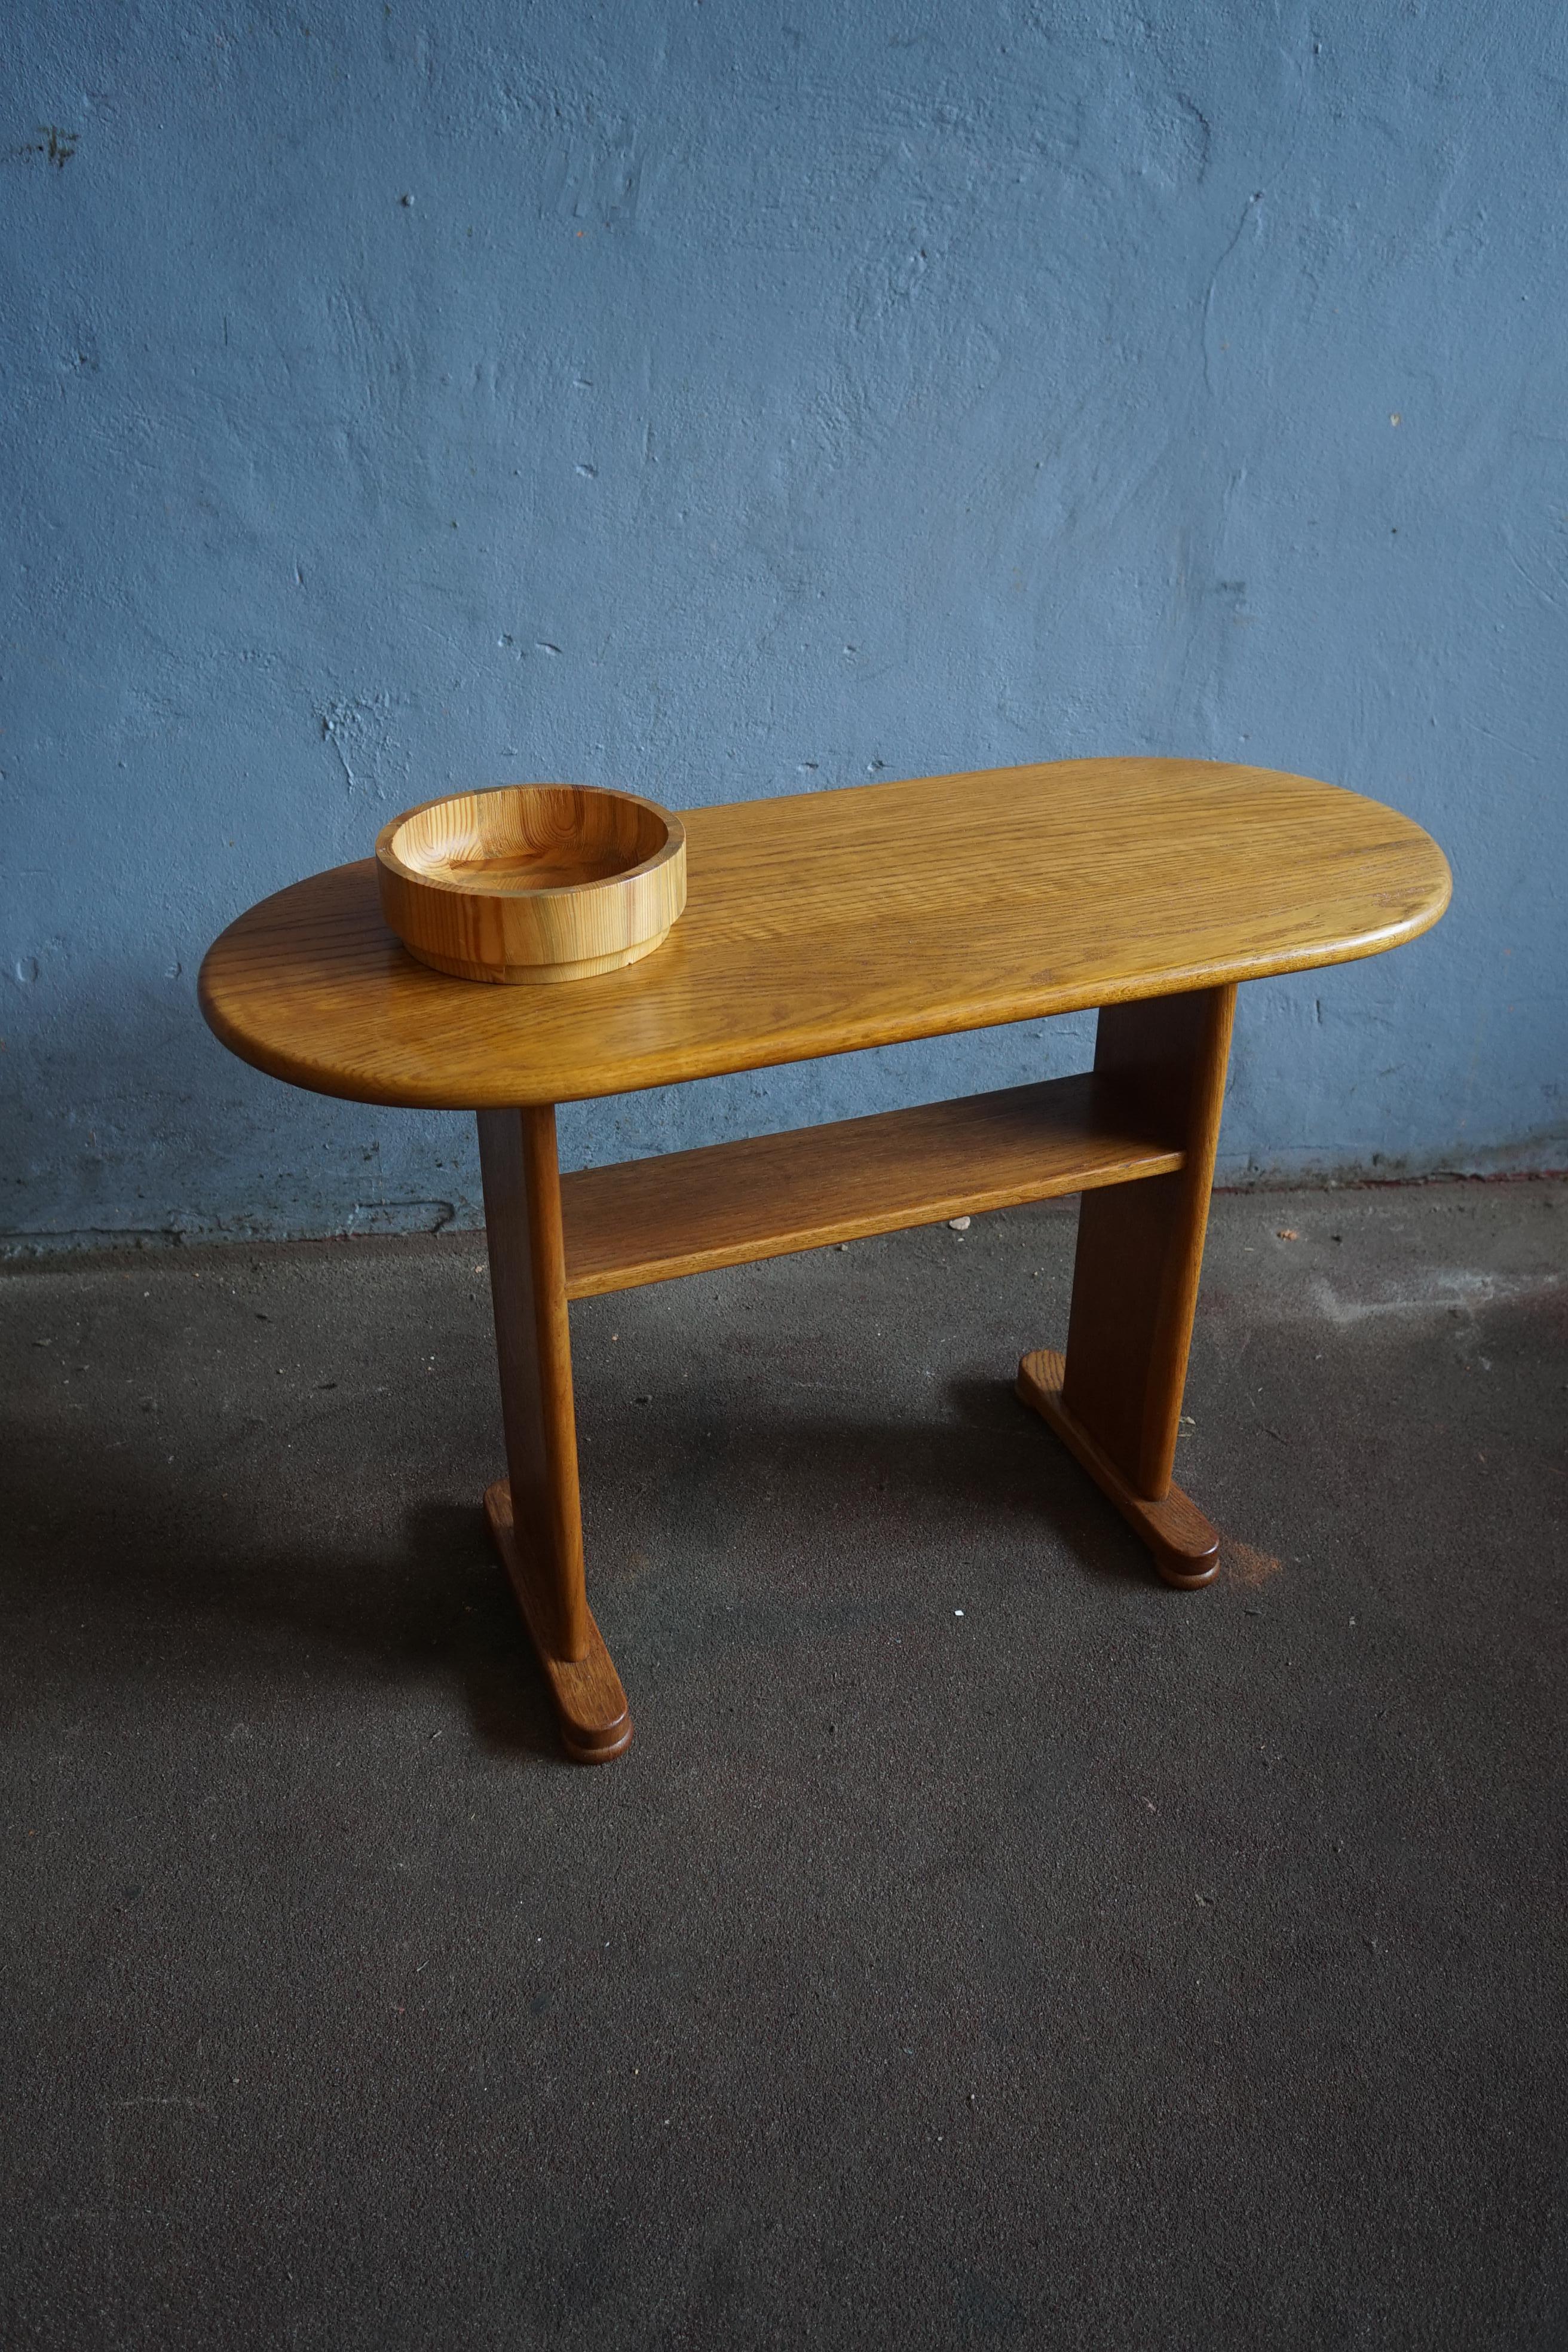 Rare Fritz Hansen model 1560 side table in beautiful patinaed solid oak made in Denmark in the 1930's by Fritz Hansen.

This table is the perfect entrance piece or side table next to the sofa, the table has a magasin shelf which adds great detail to